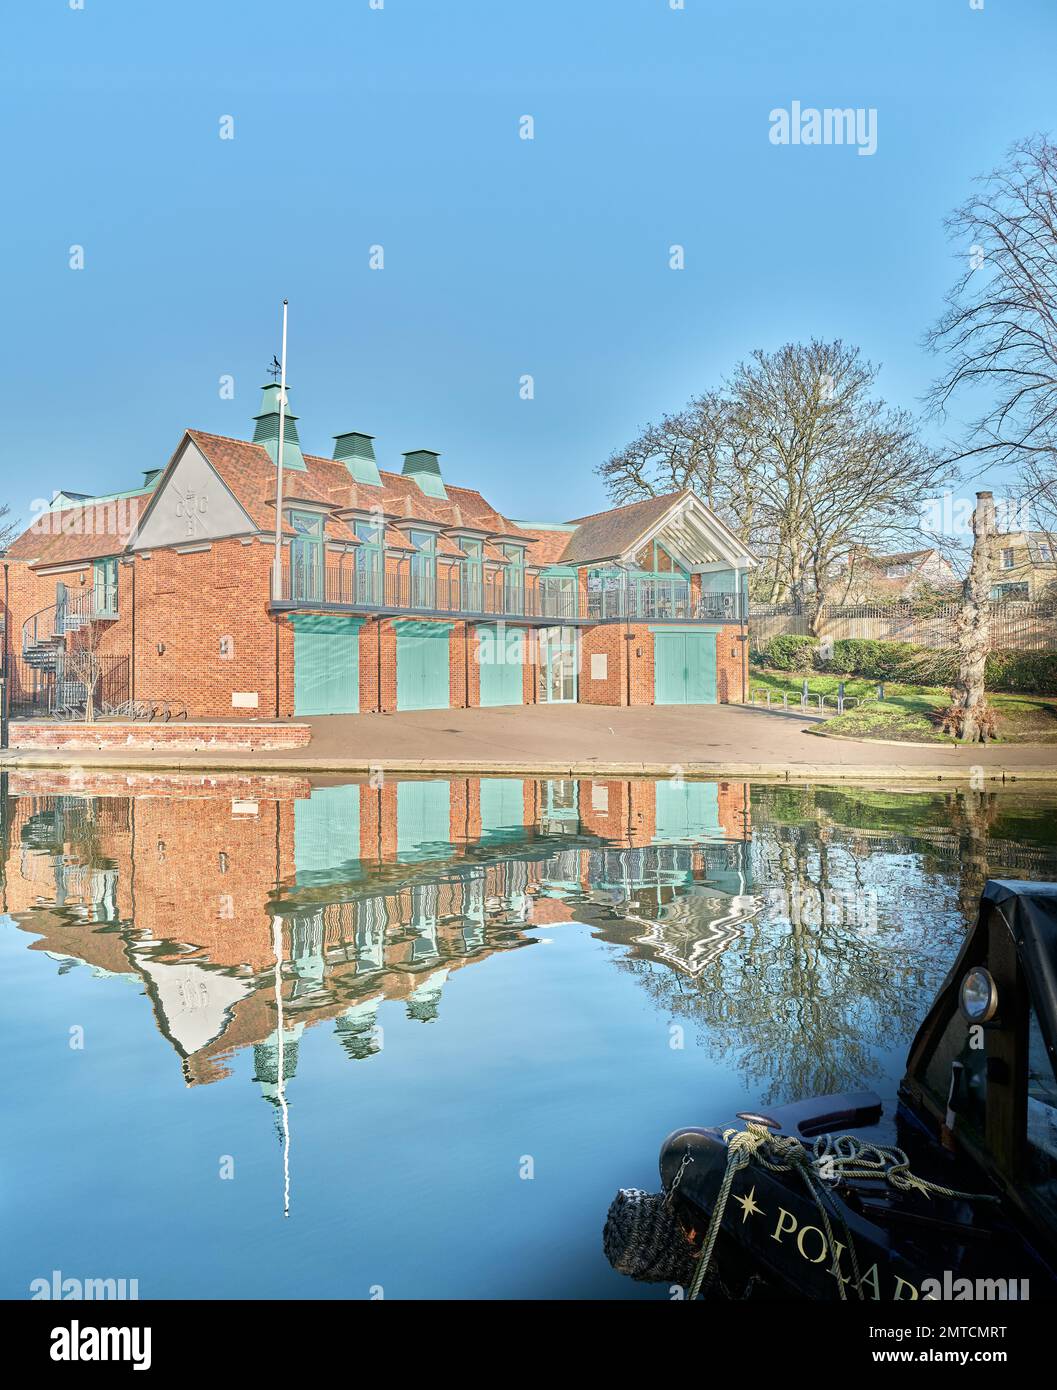 University of Cambridge, Caius college, boat club house at a bank of the river Cam, Cambridge, England, on a sunny winter day. Stock Photo